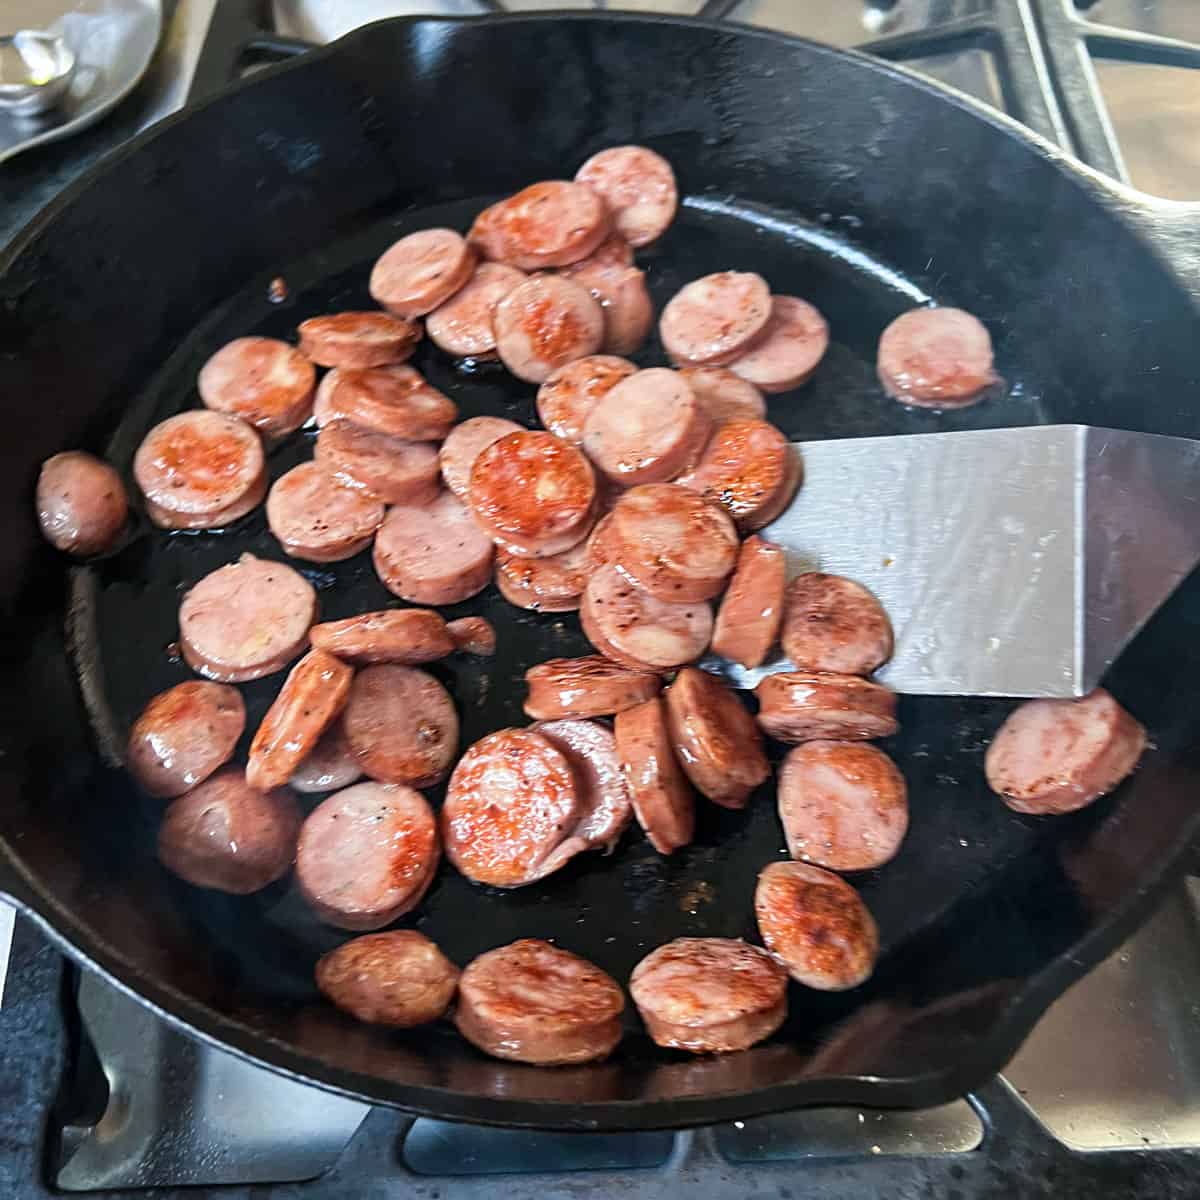 Metal spatula flipping sliced rounds of sauteed smoked sausage in a cast iron skillet.